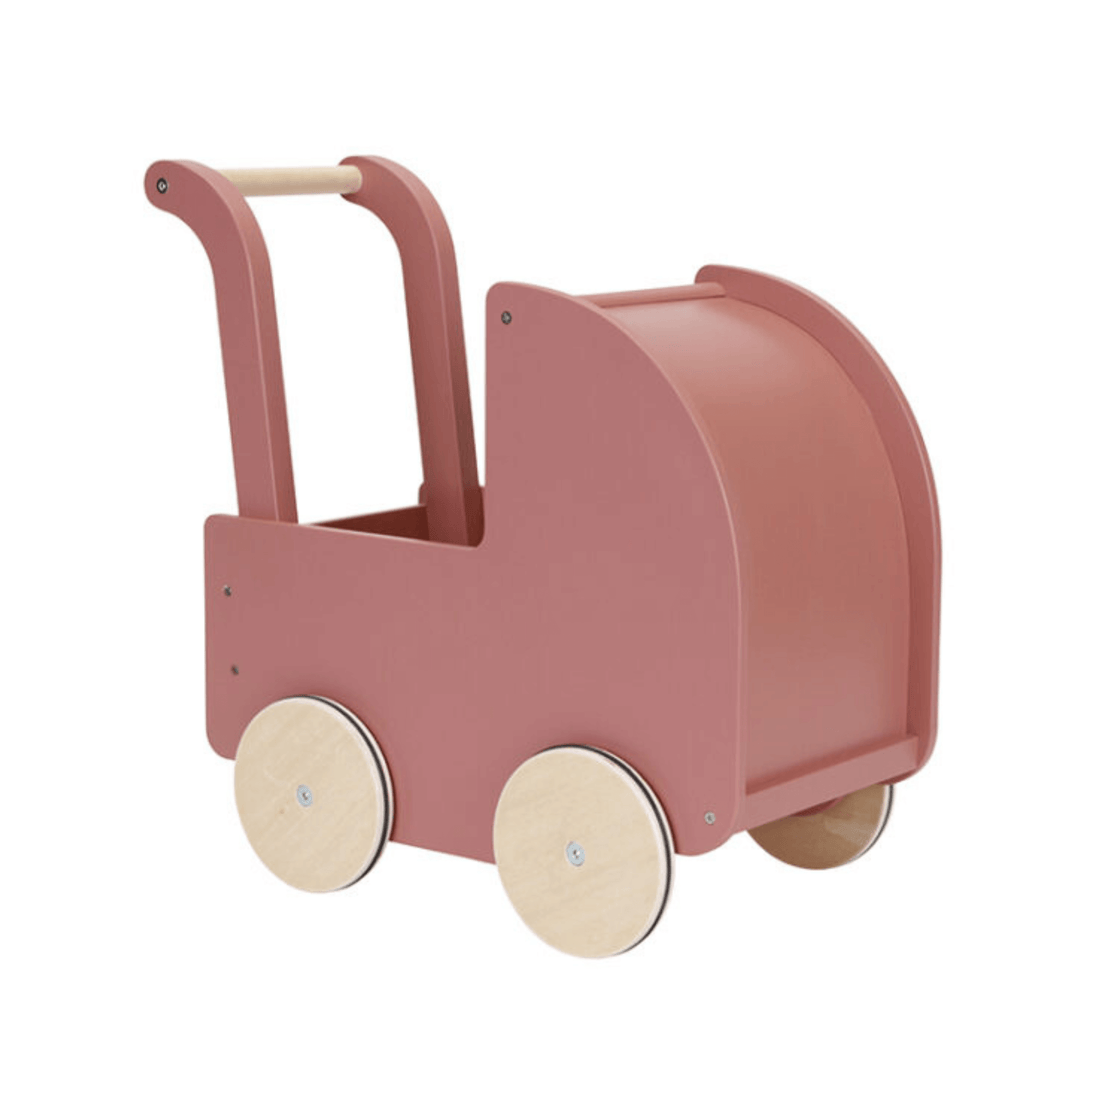 Doll carriage with bedding and doll